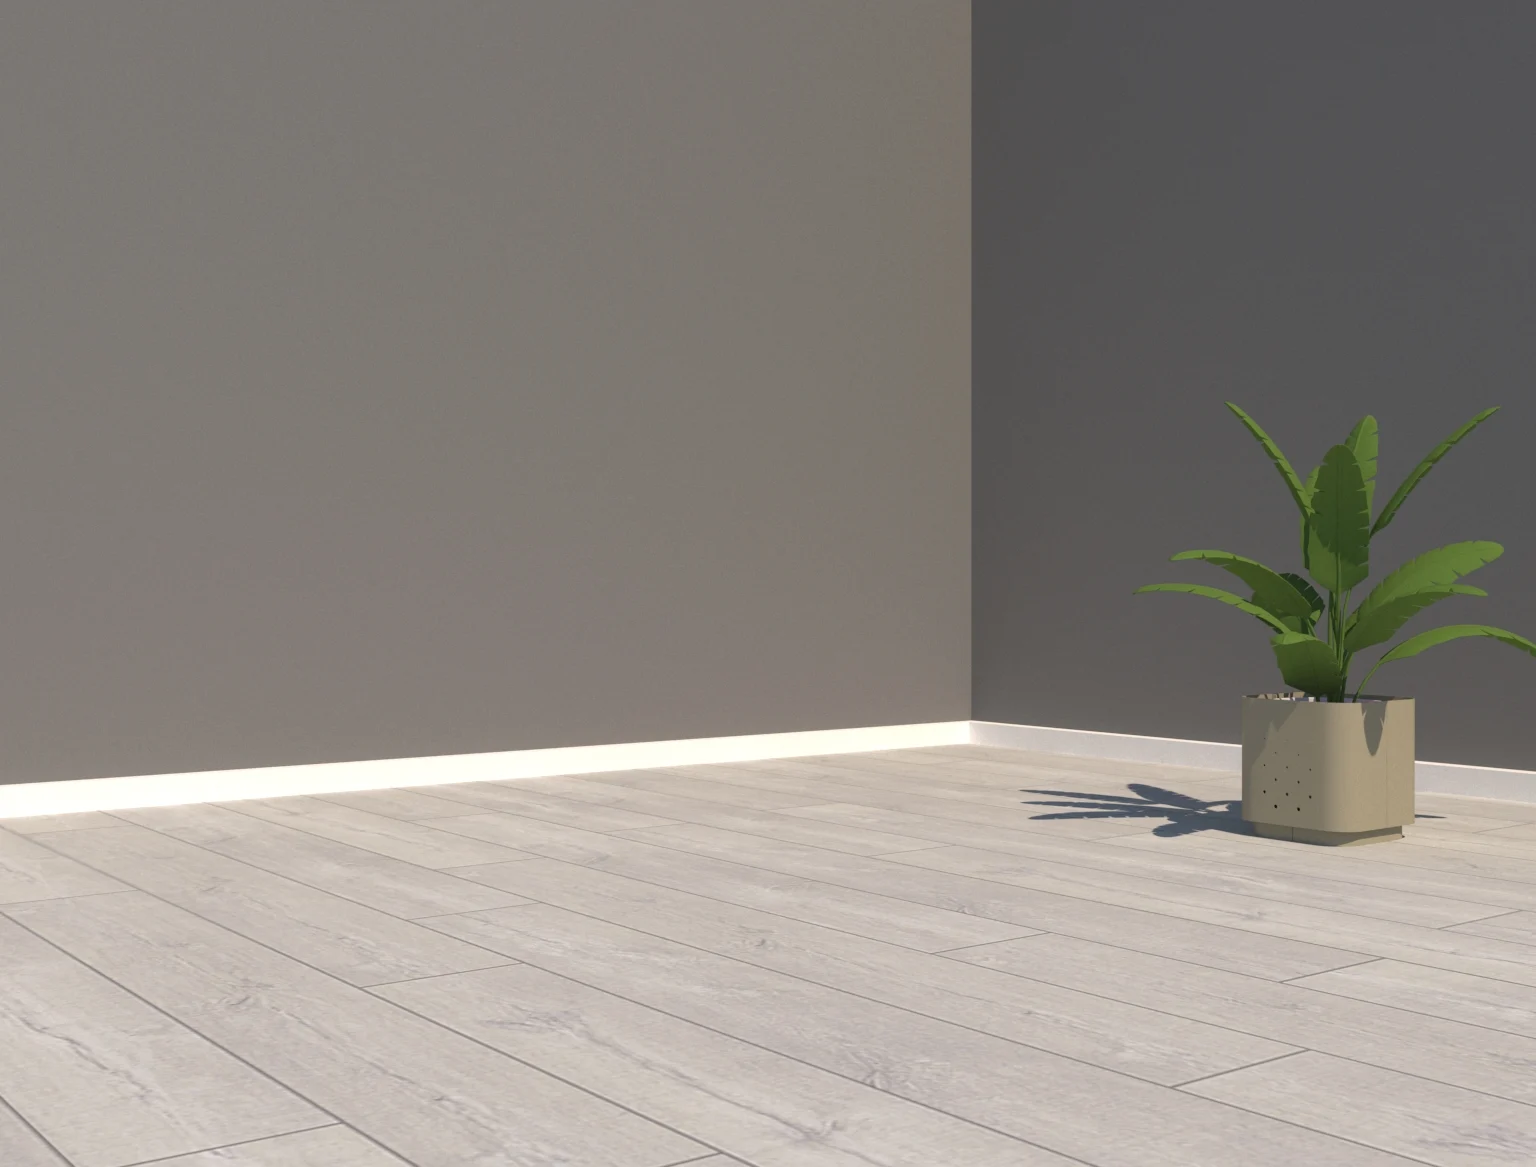 off-white hardwood floors with gray walls